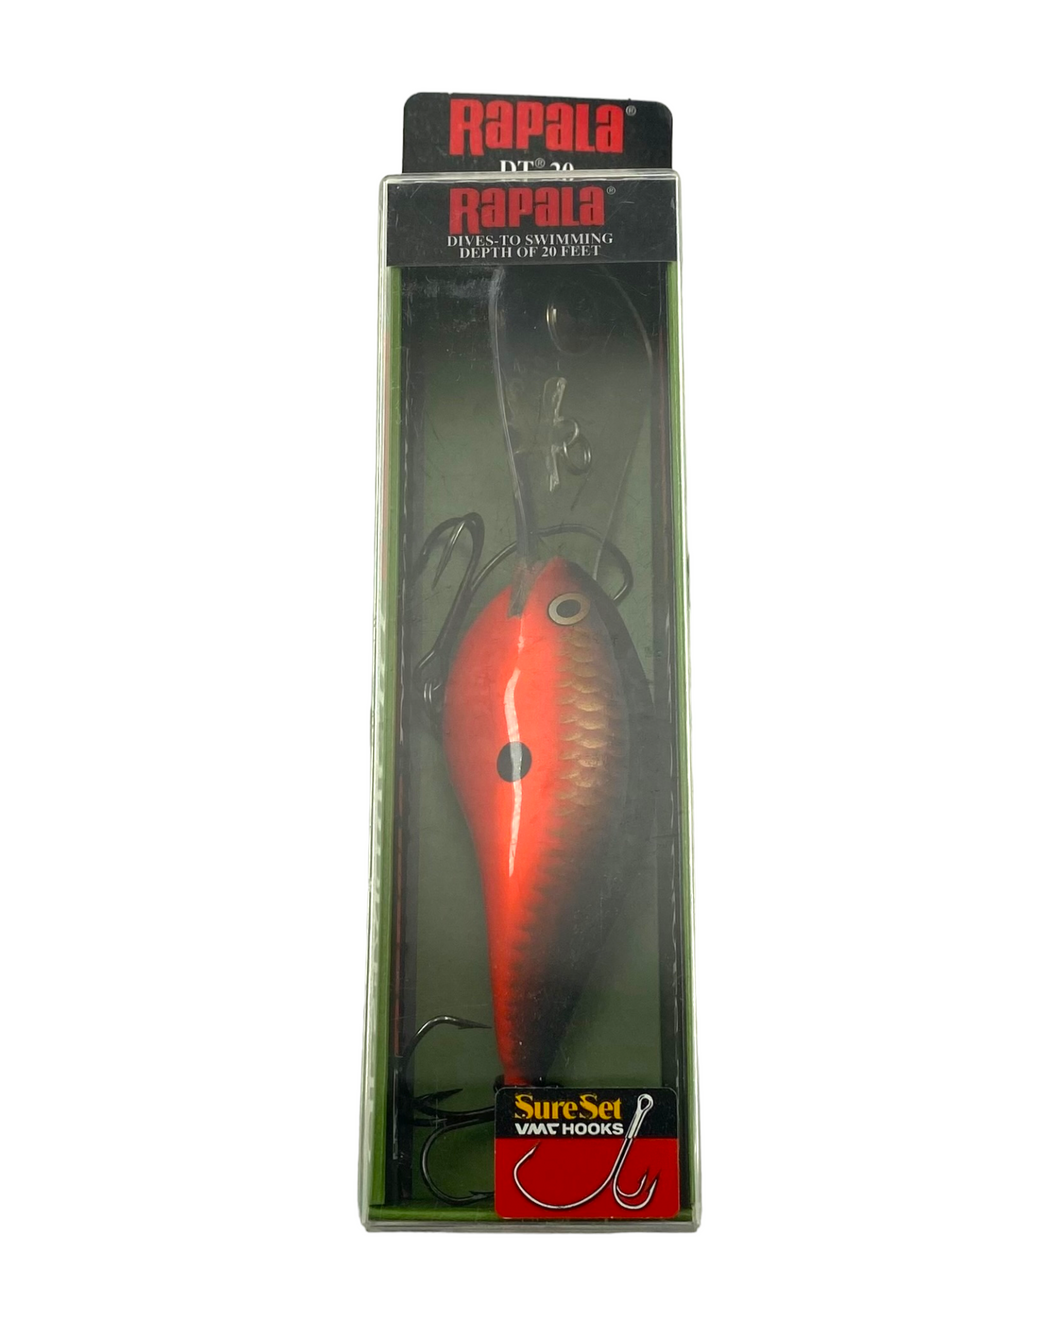 DIVES-TO 20 Feet • Rapala DT-20 Fishing Lure • DTMSS20 RCW RED